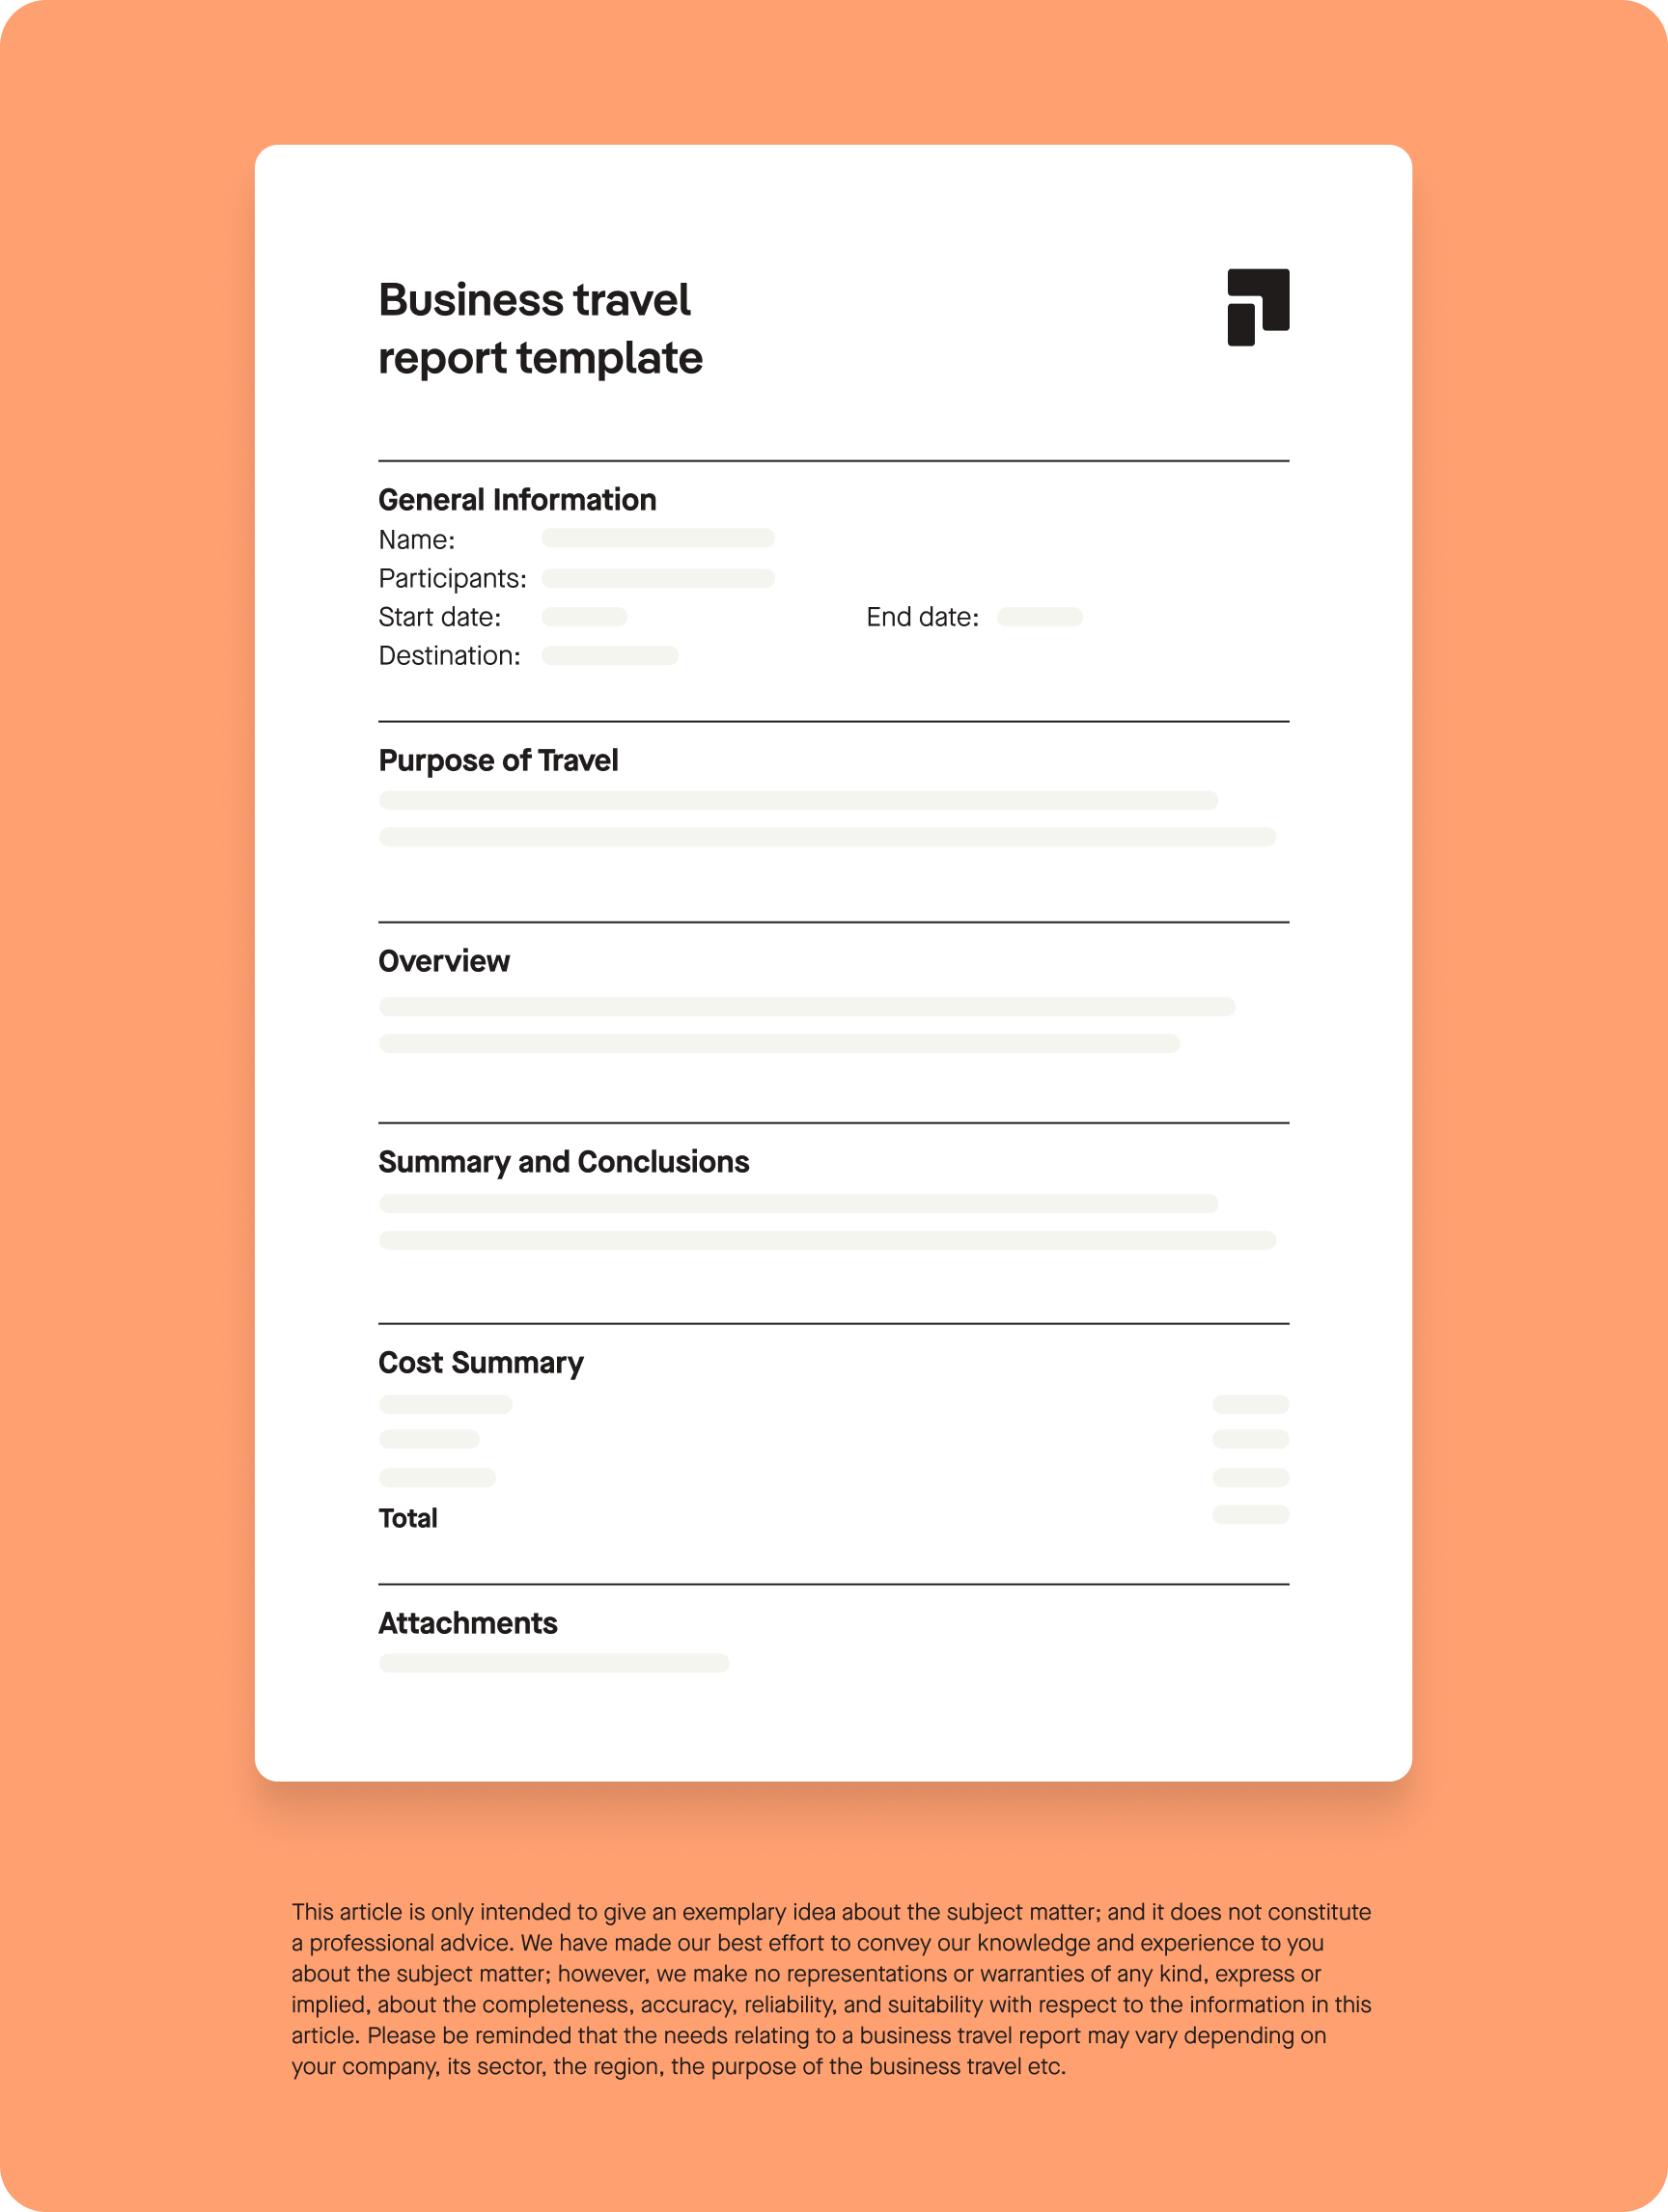 A simple travel report template to help you write a trip report